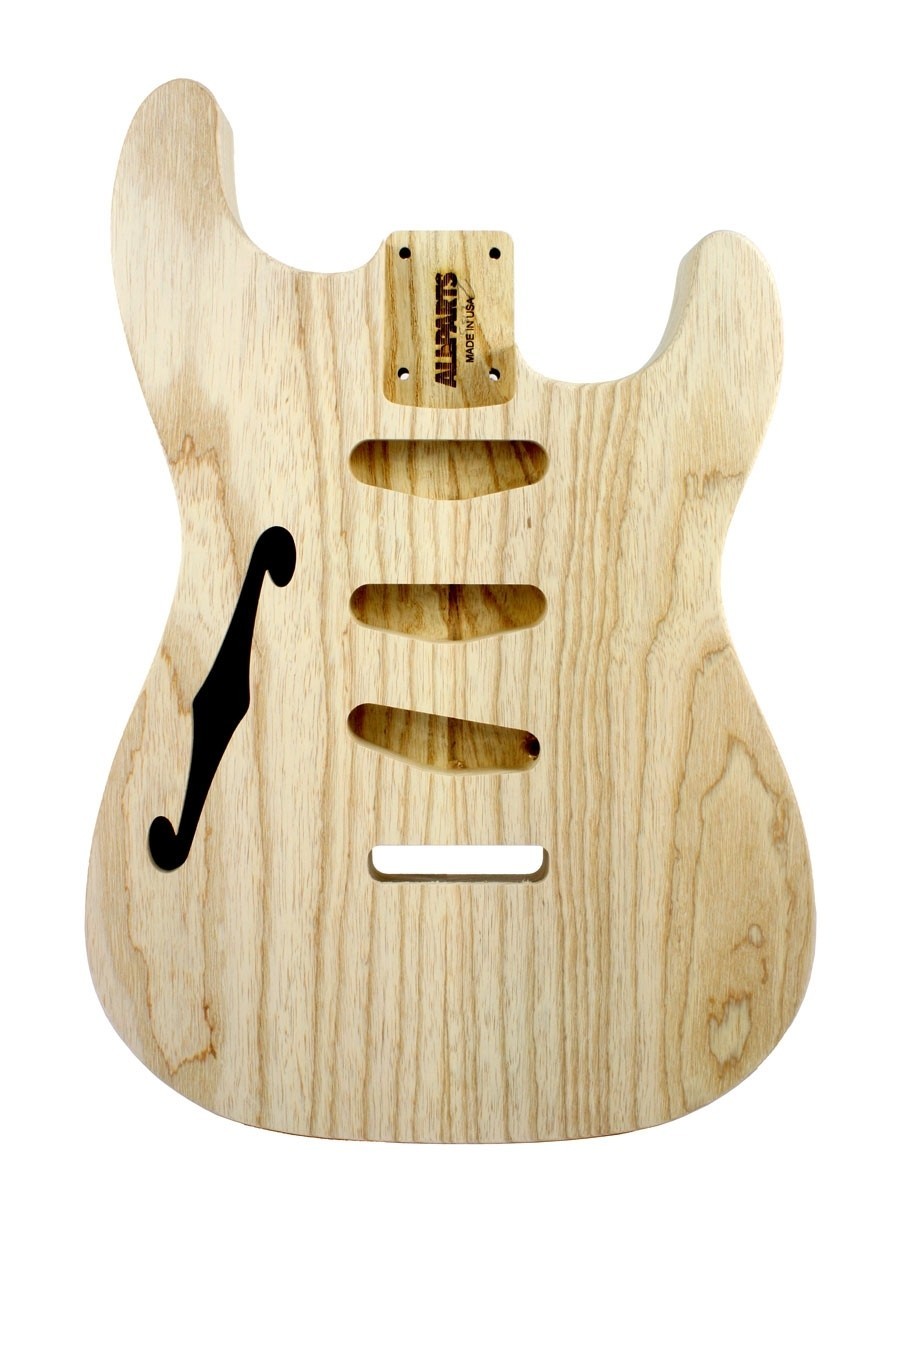 ALLPARTS SBAO-TL Thinline Ash Replacement Body for Stratocaster 